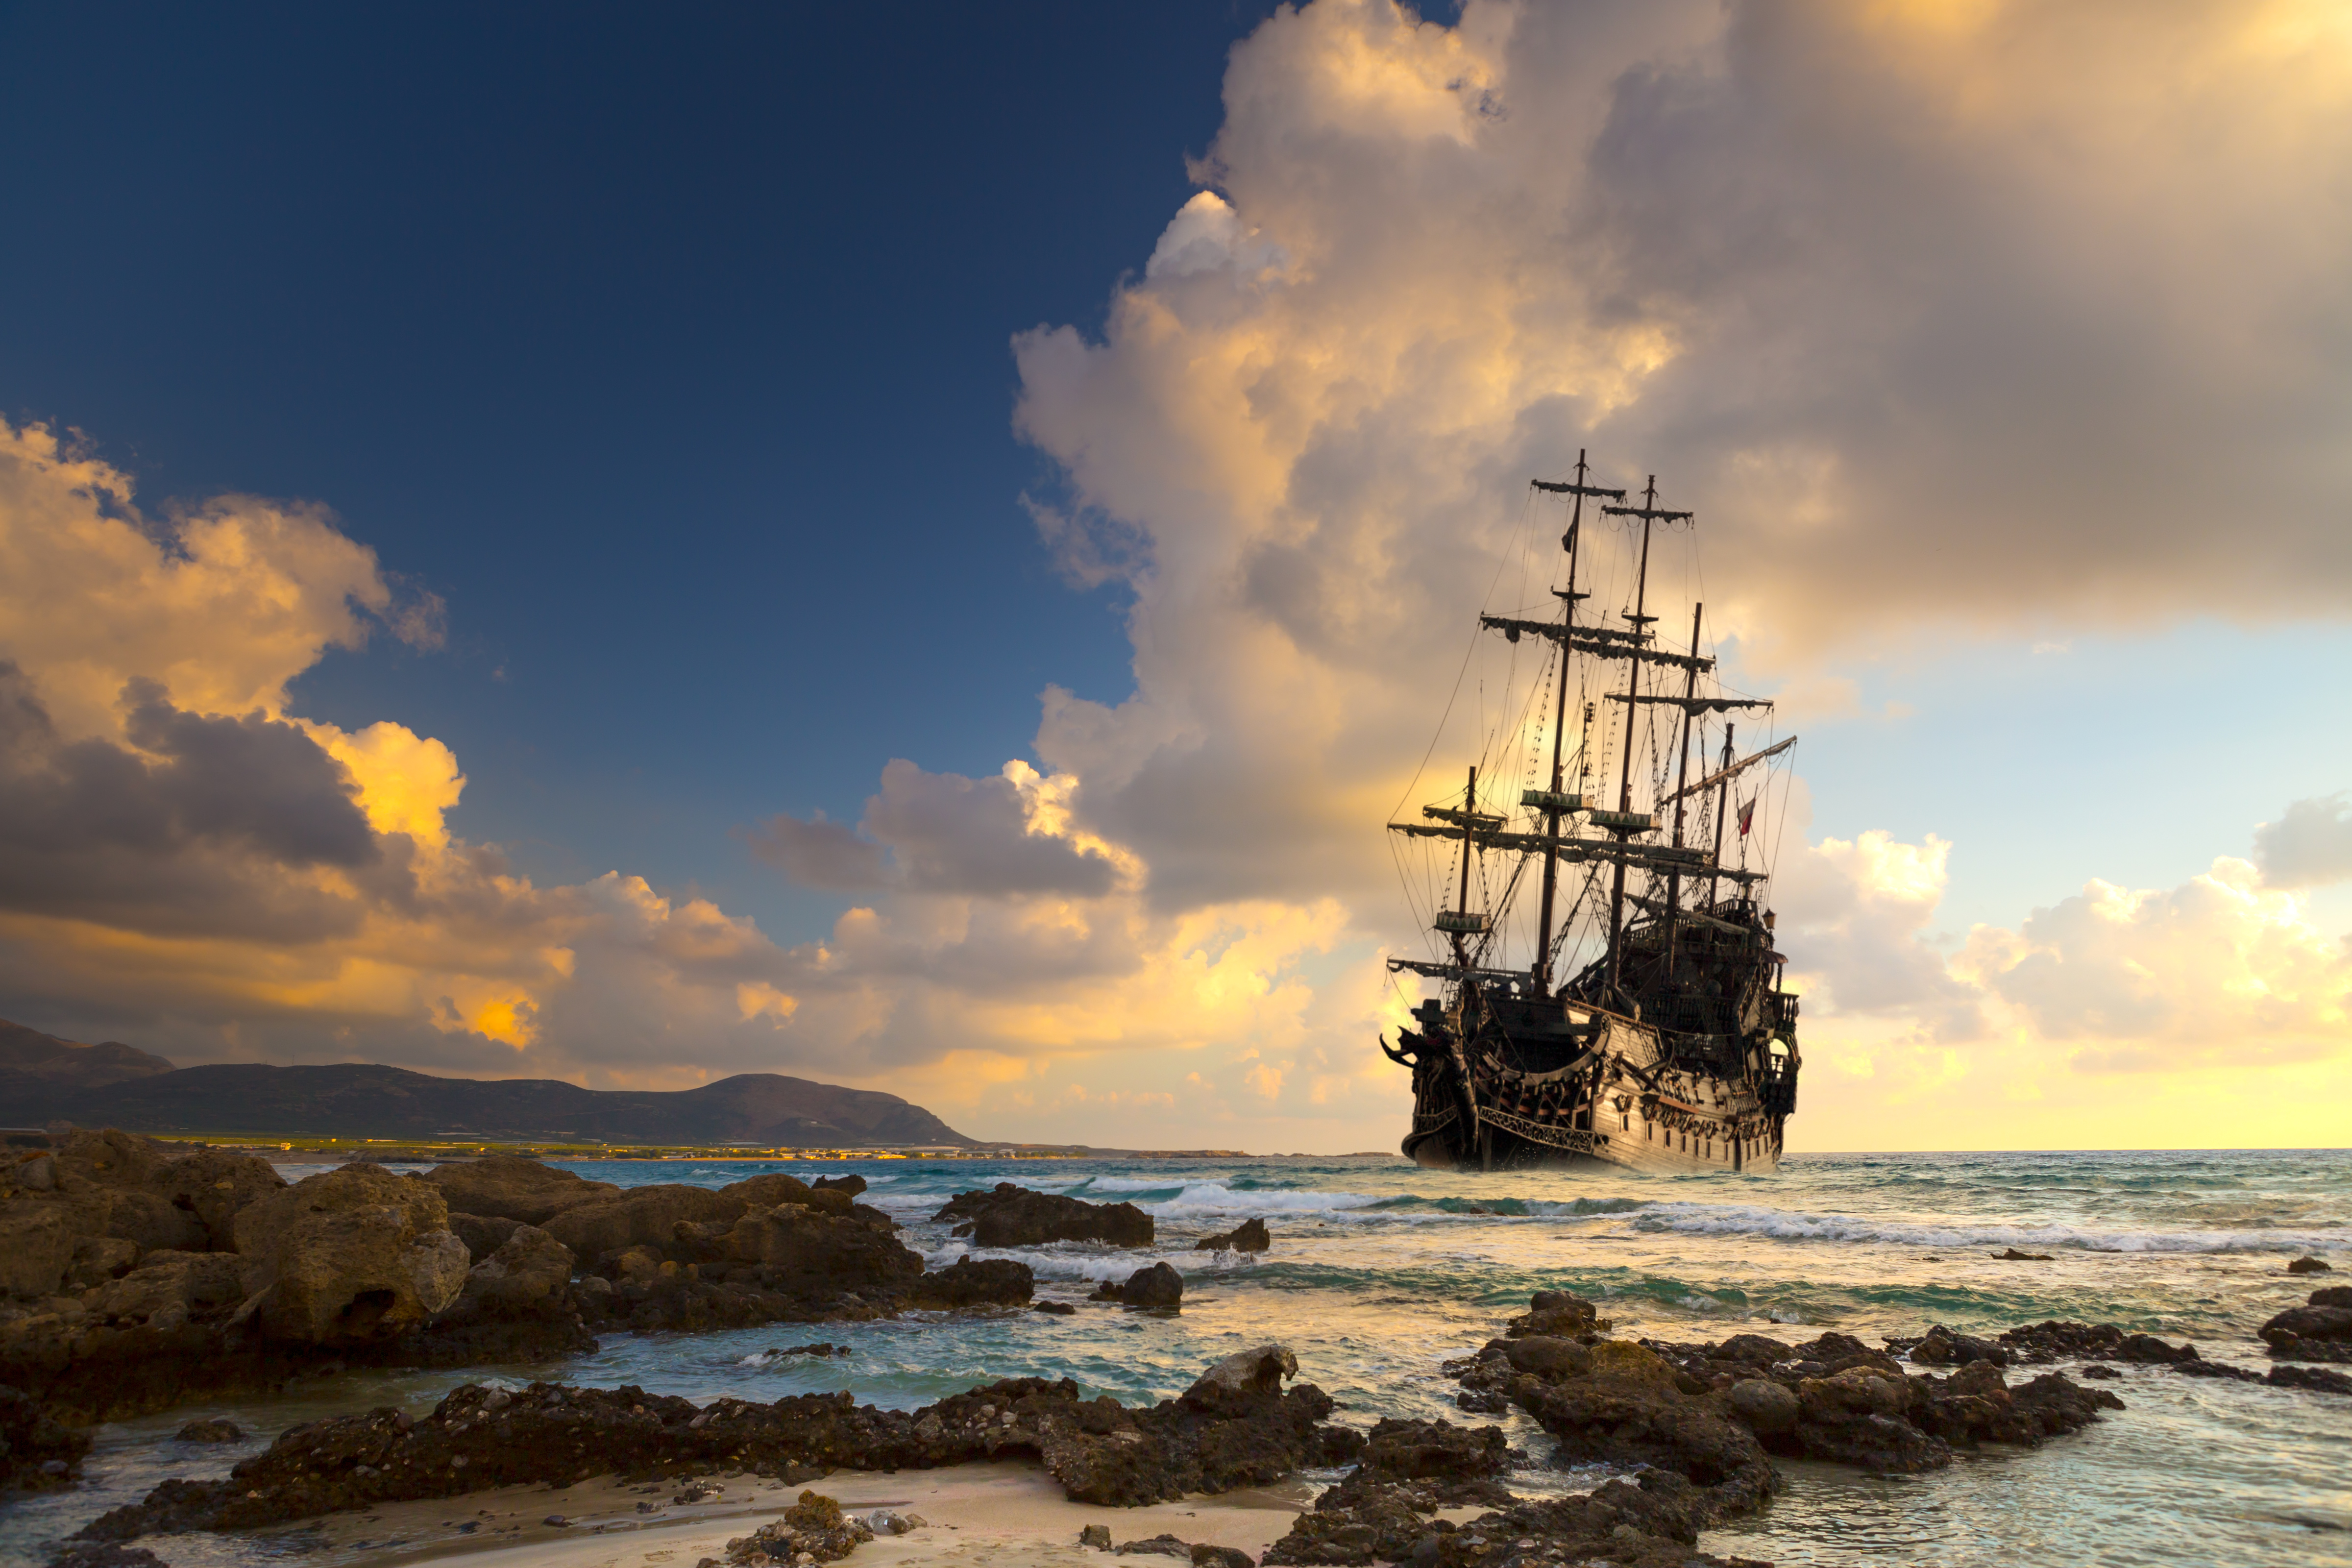 Pirate ship at the open sea